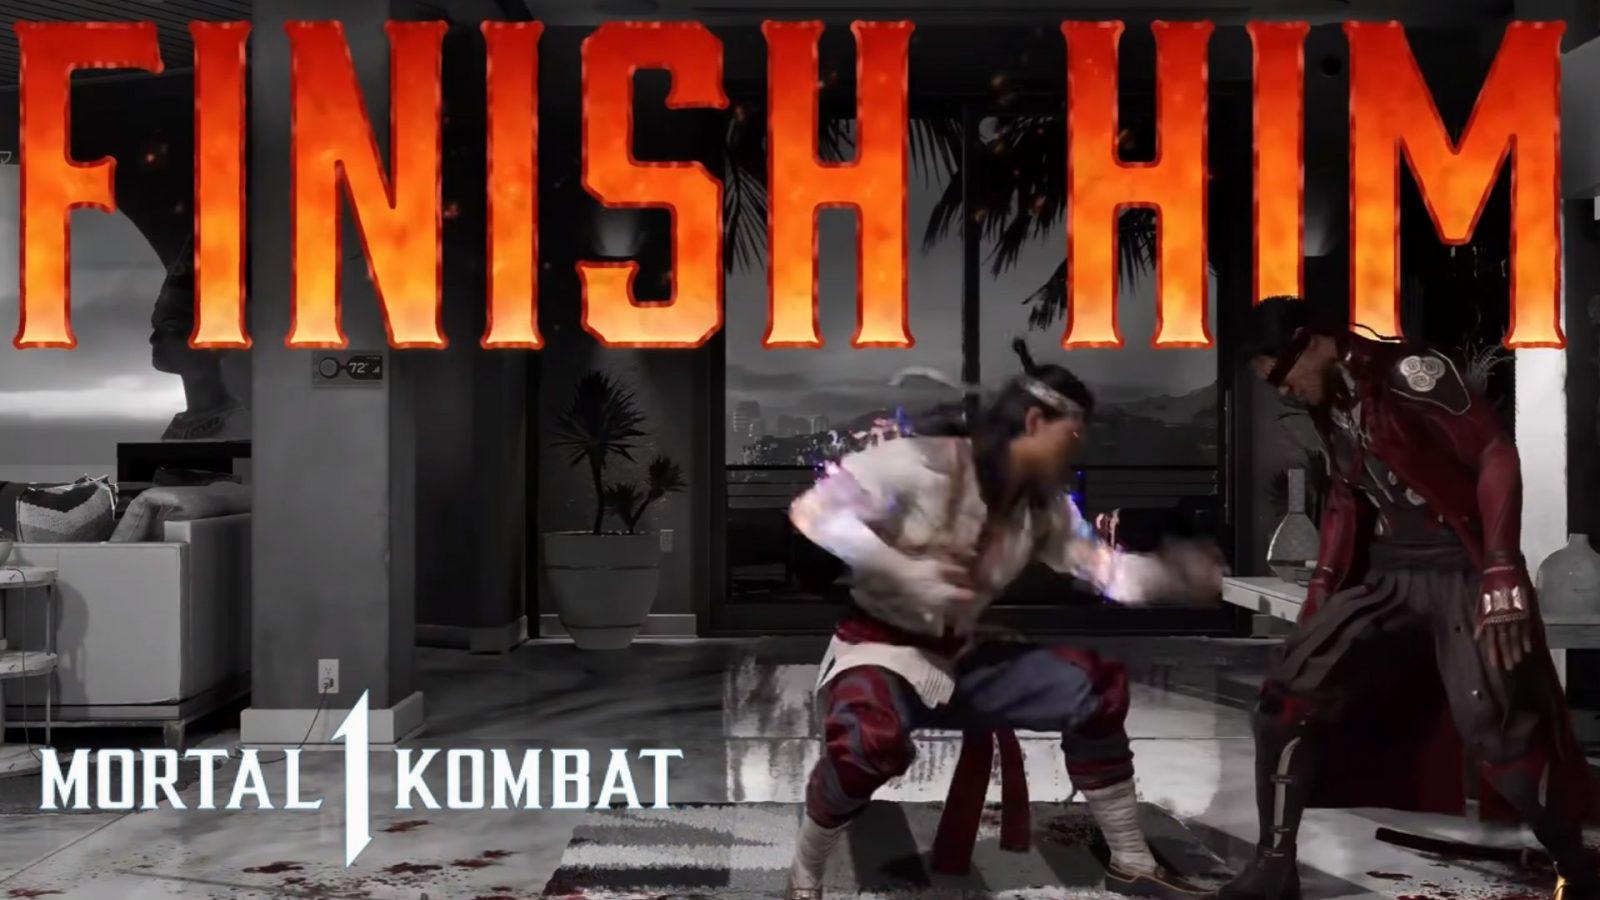 How to do a Fatality in Mortal Kombat 1 - Dexerto